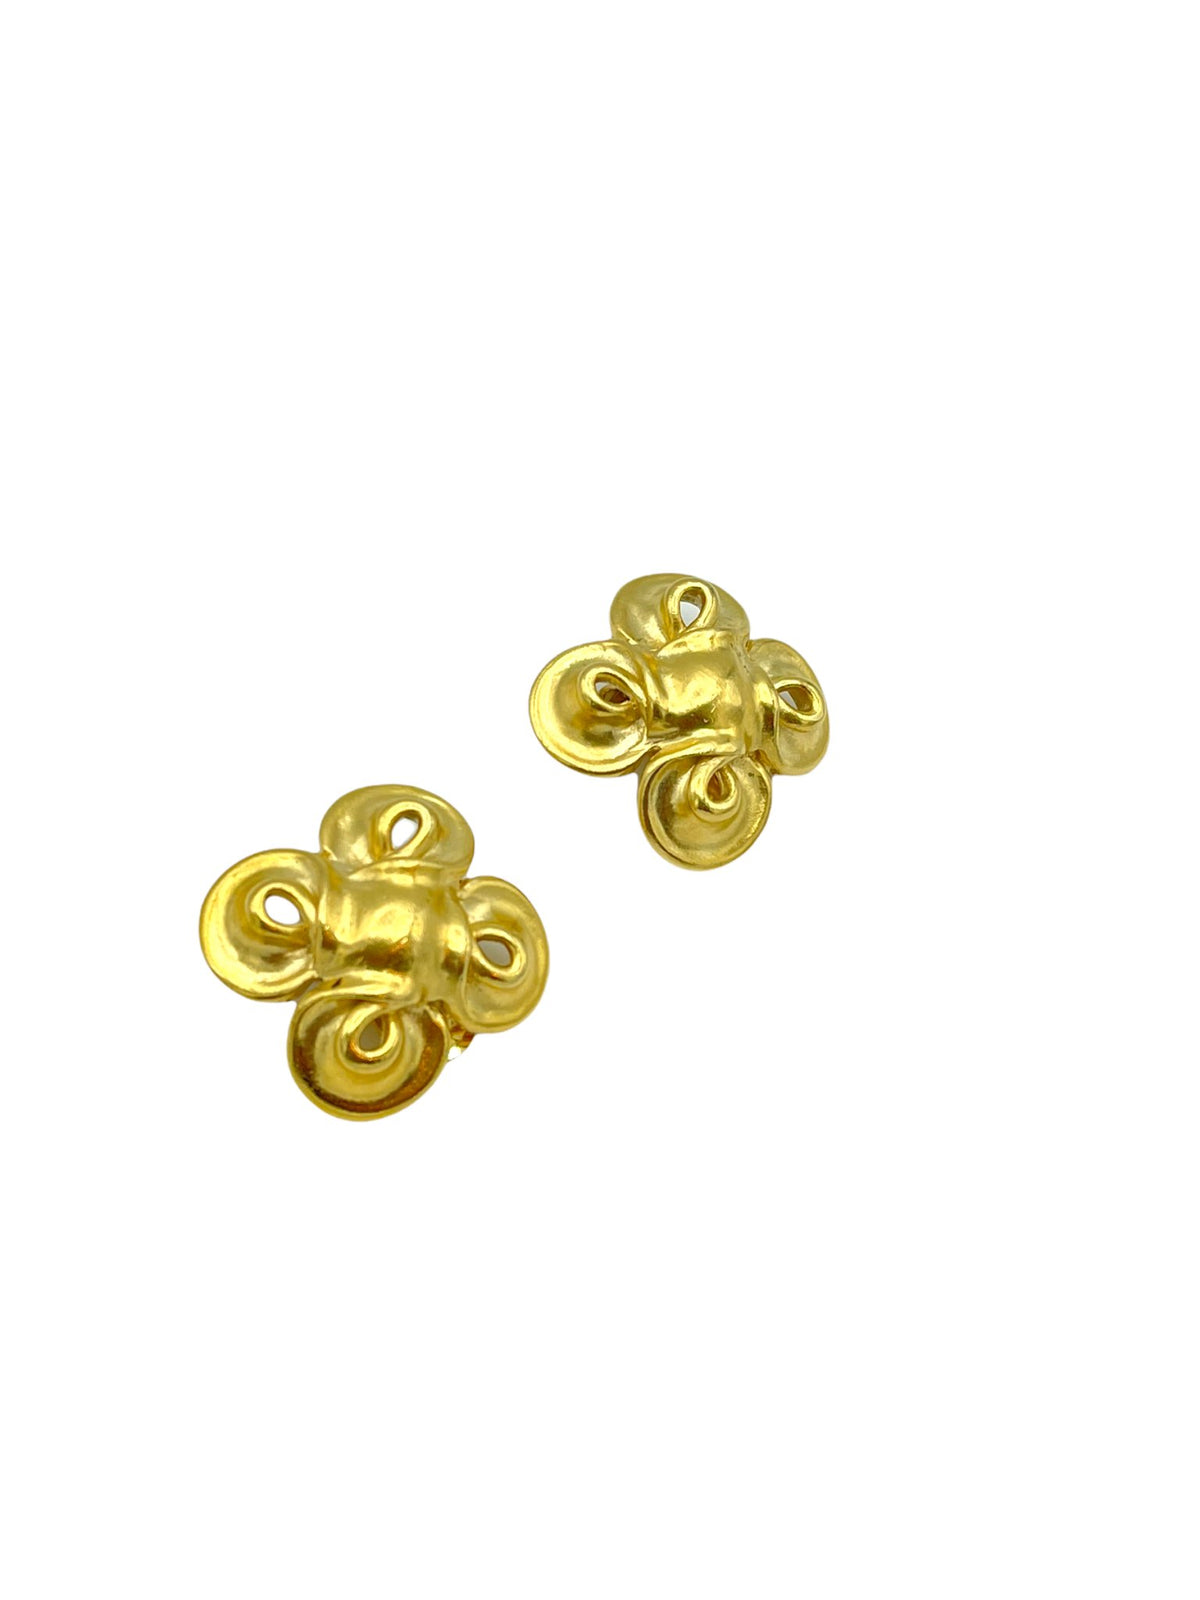 Classic Matt Gold Knot Vintage Clip-On Earrings - 24 Wishes Vintage Jewelry